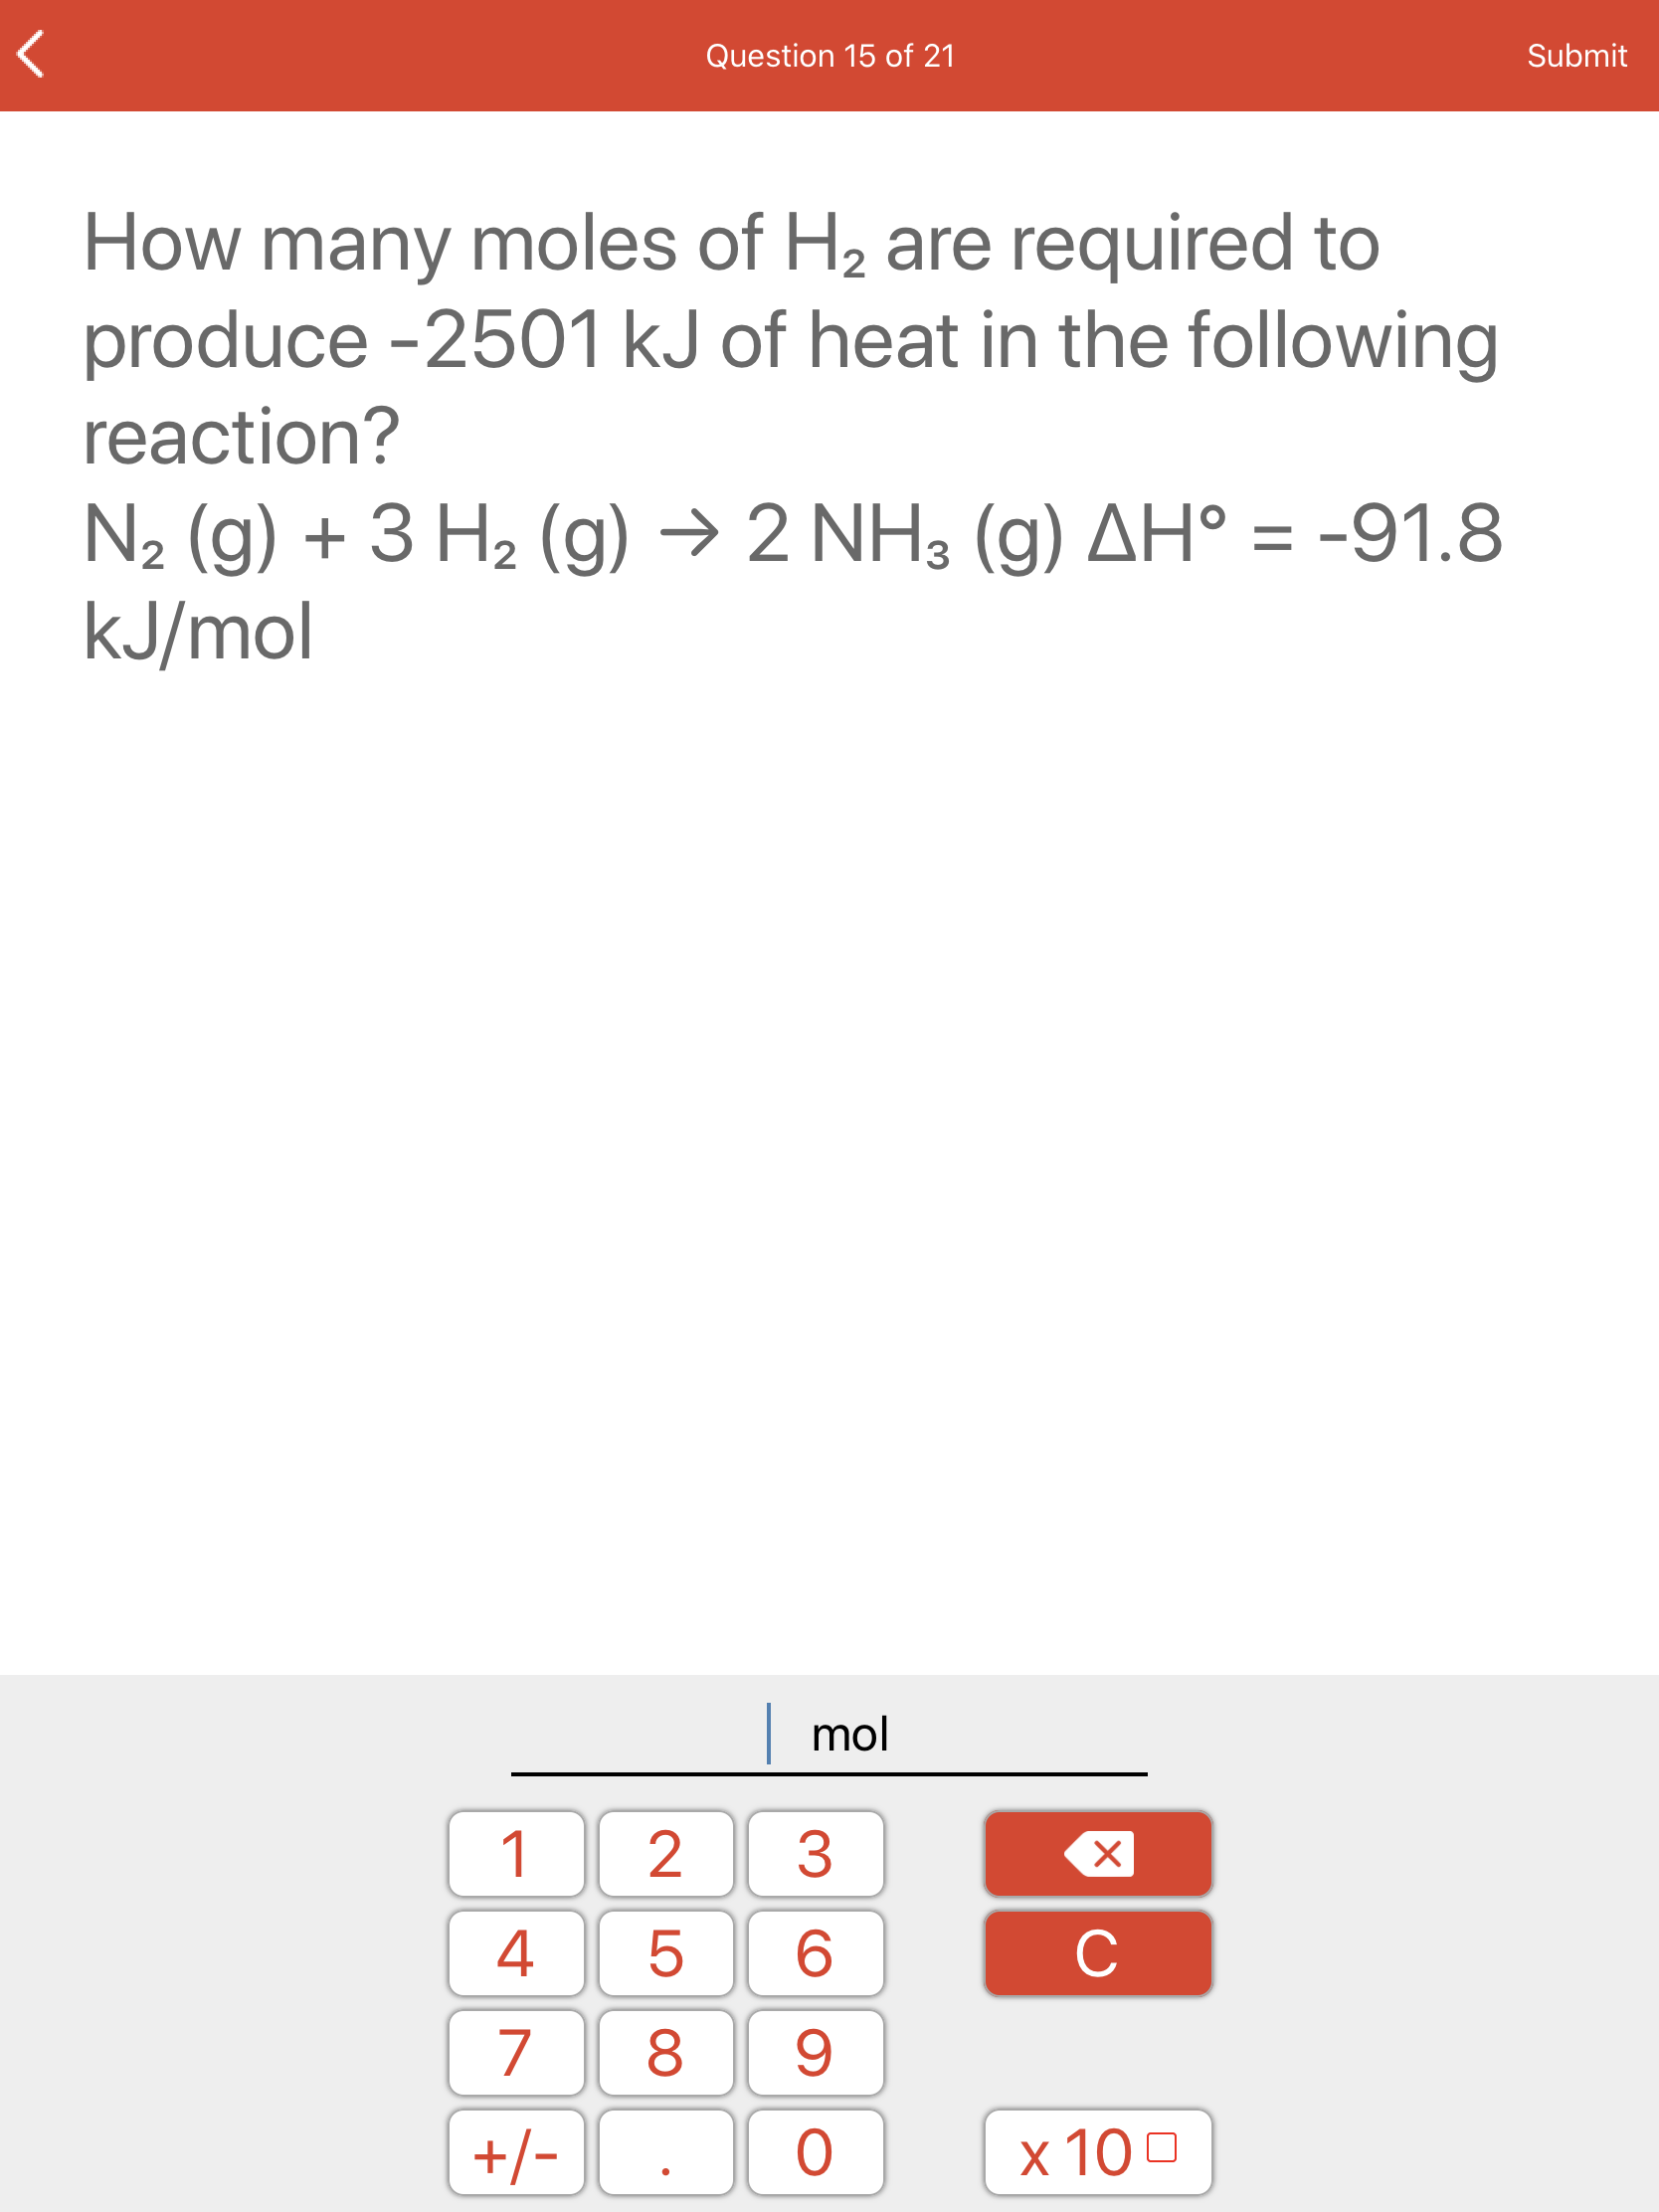 How many moles of H2 are required to
produce -2501 kJ of heat in the following
reaction?
N2 (g) + 3 H2 (g) → 2 NH3 (g) AH° = -91.8
kJ/mol
